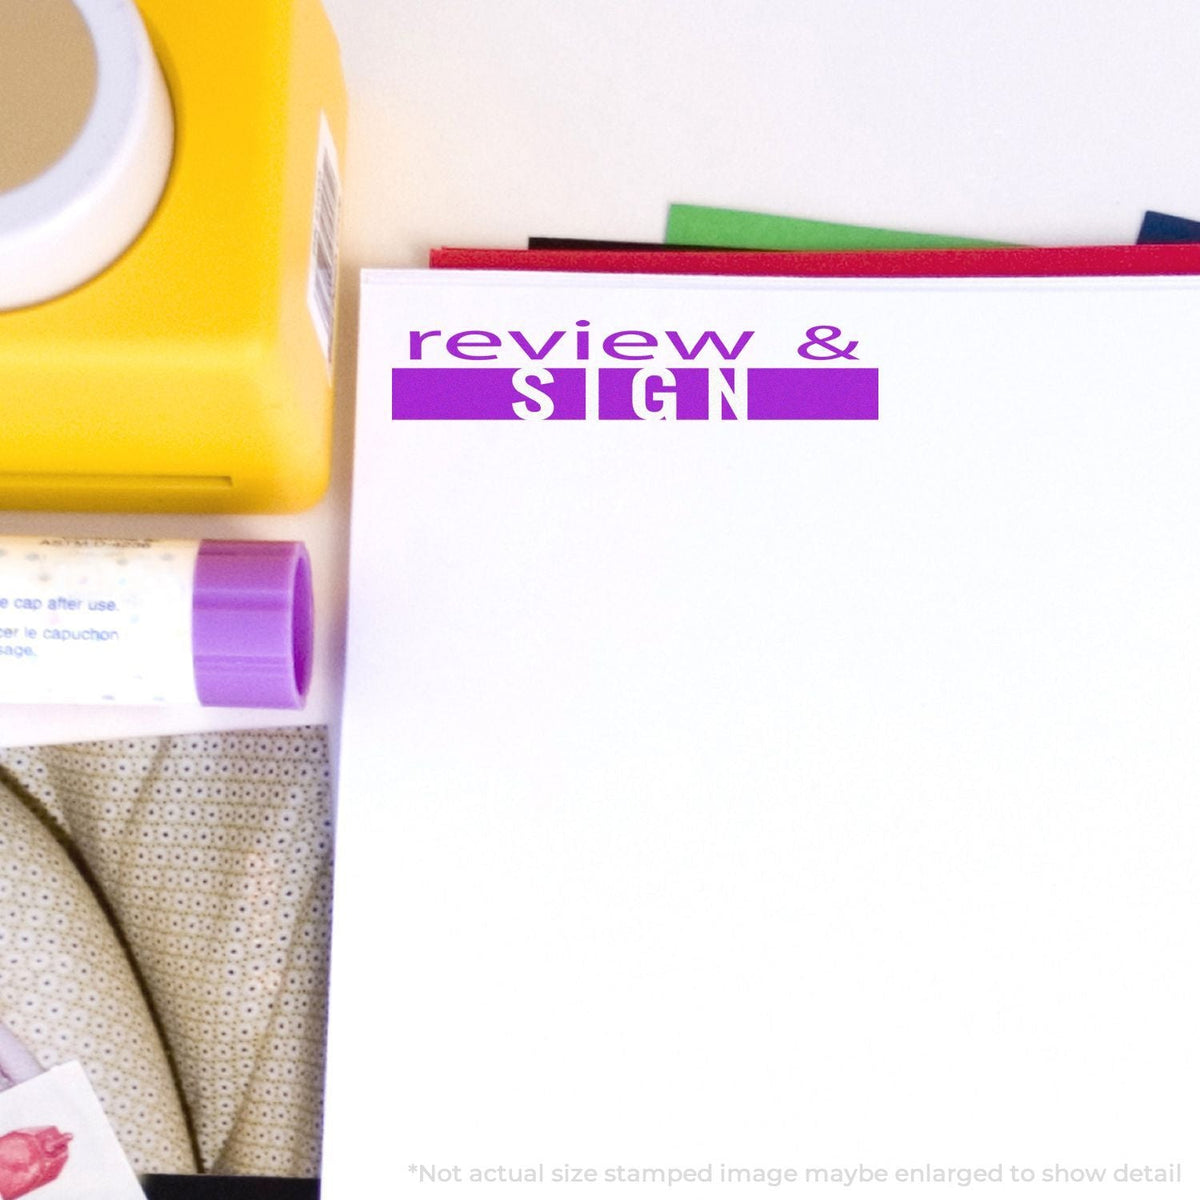 In Use Self-Inking Review and Sign Stamp Image